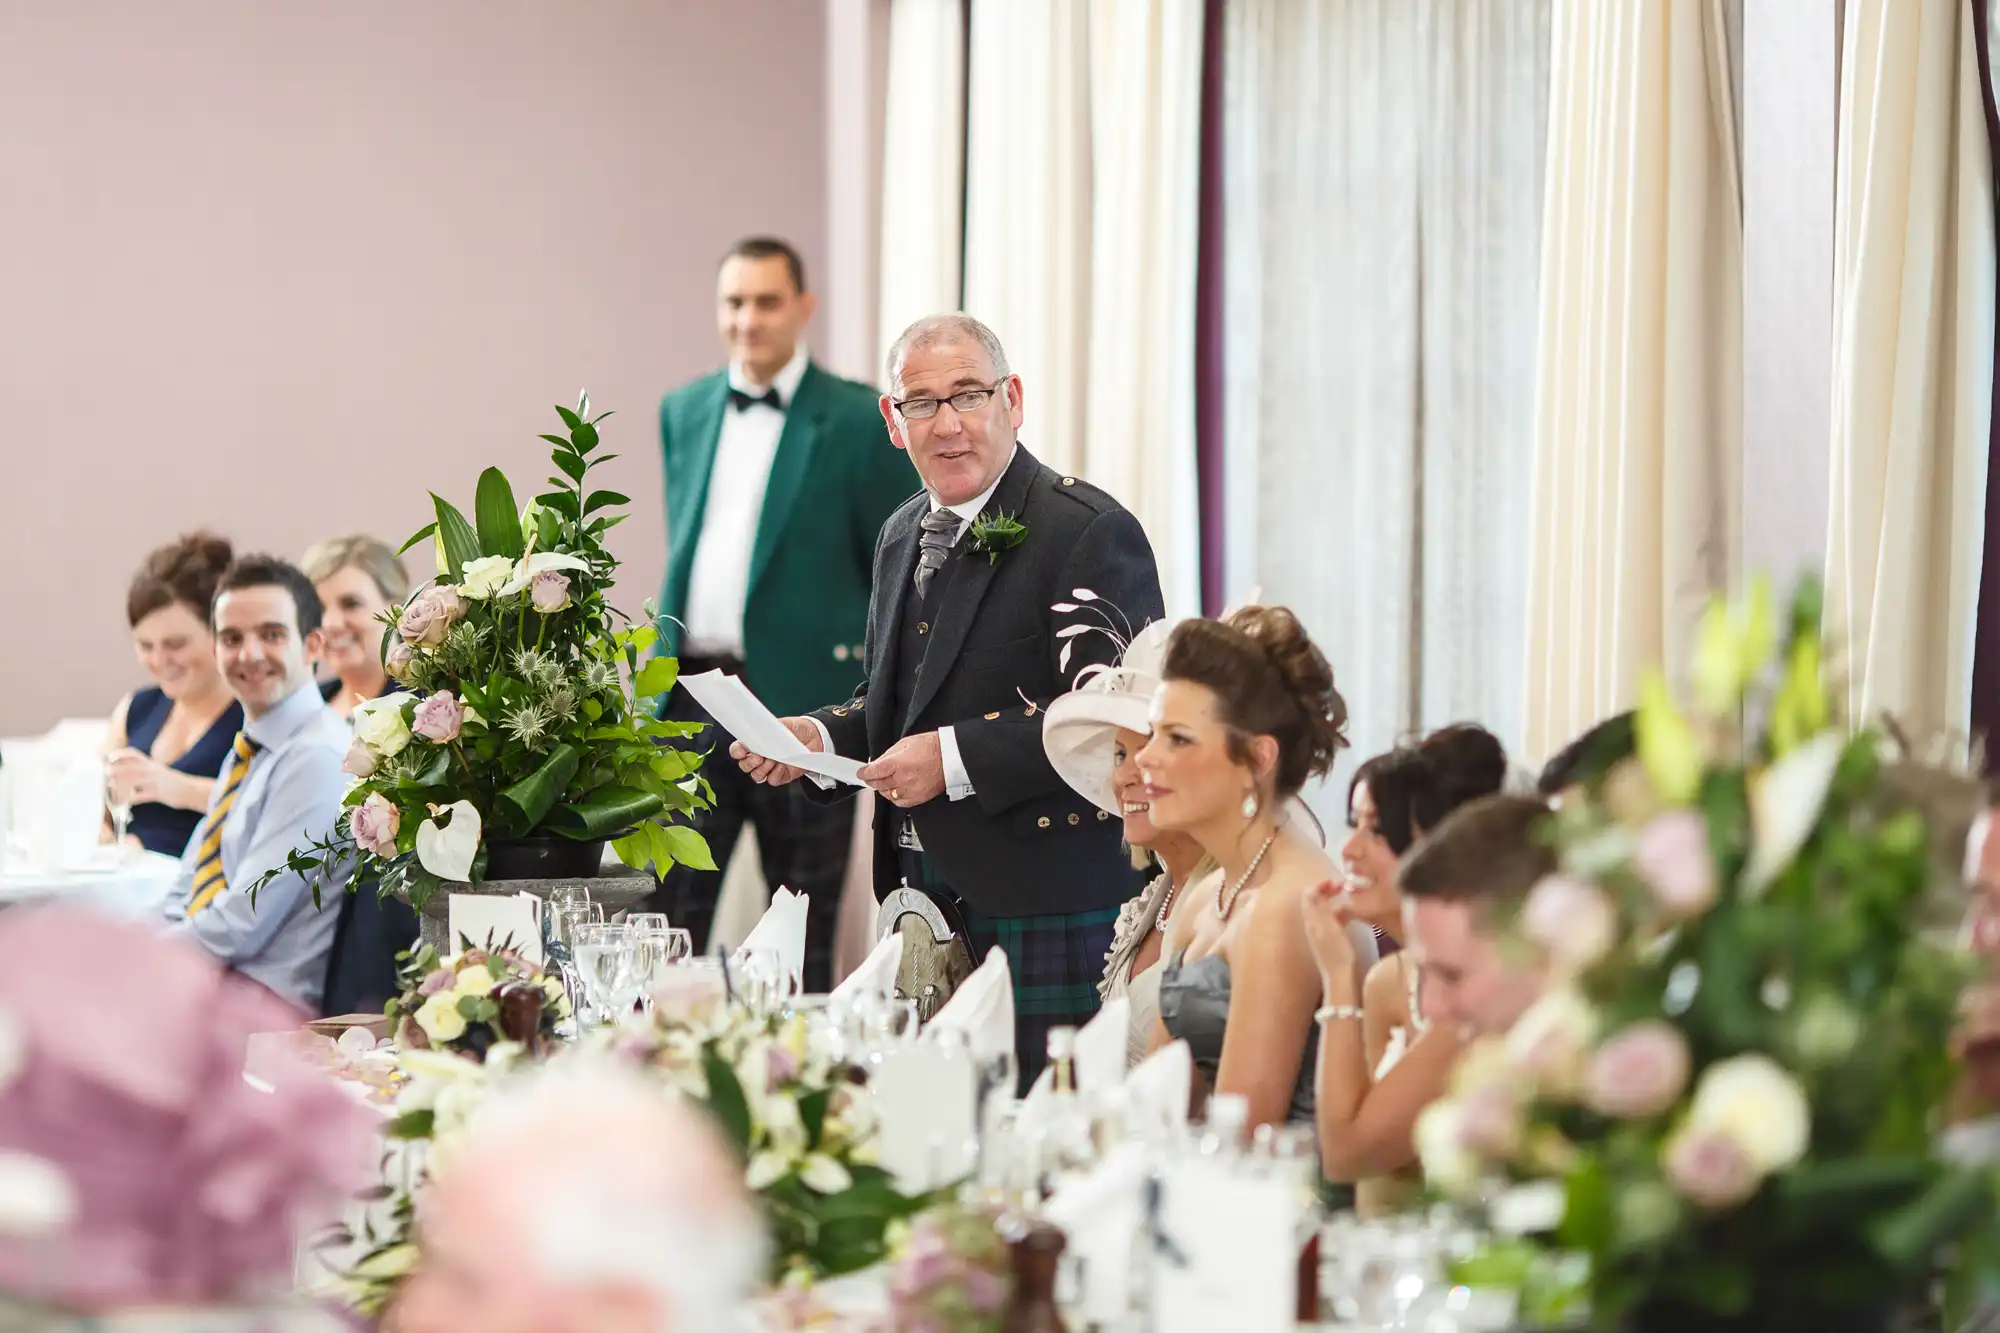 A man gives a speech at a wedding reception, holding a paper and a bouquet, with guests seated at tables, listening attentively.